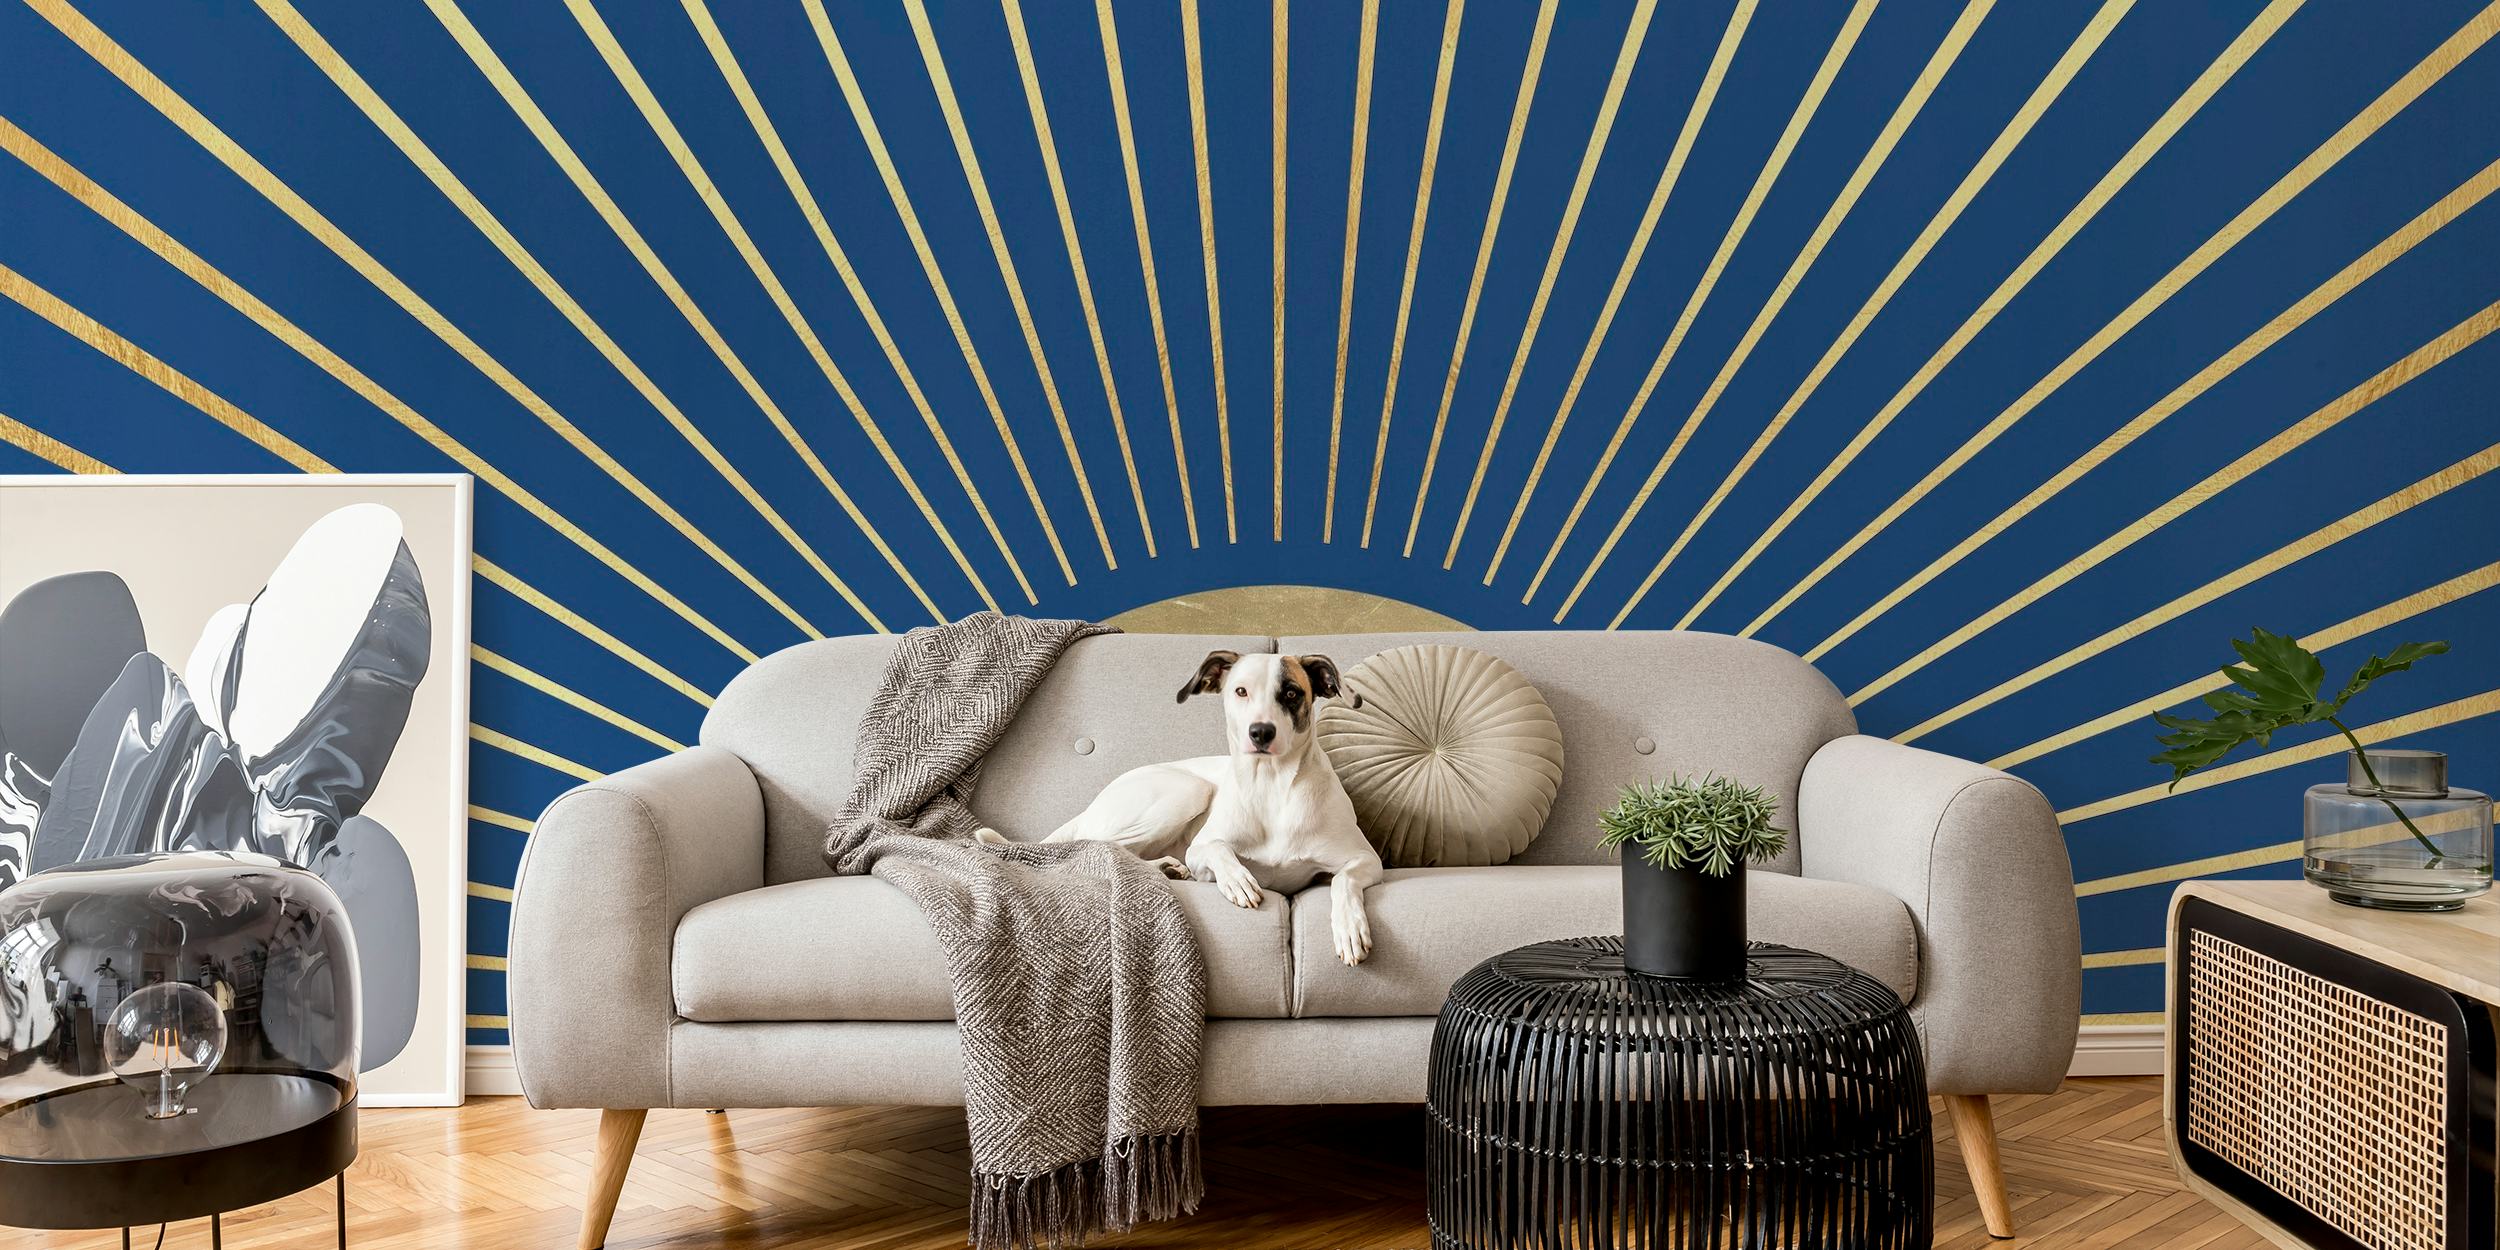 Artistic representation of sunrays mural with radial lines on a deep blue background